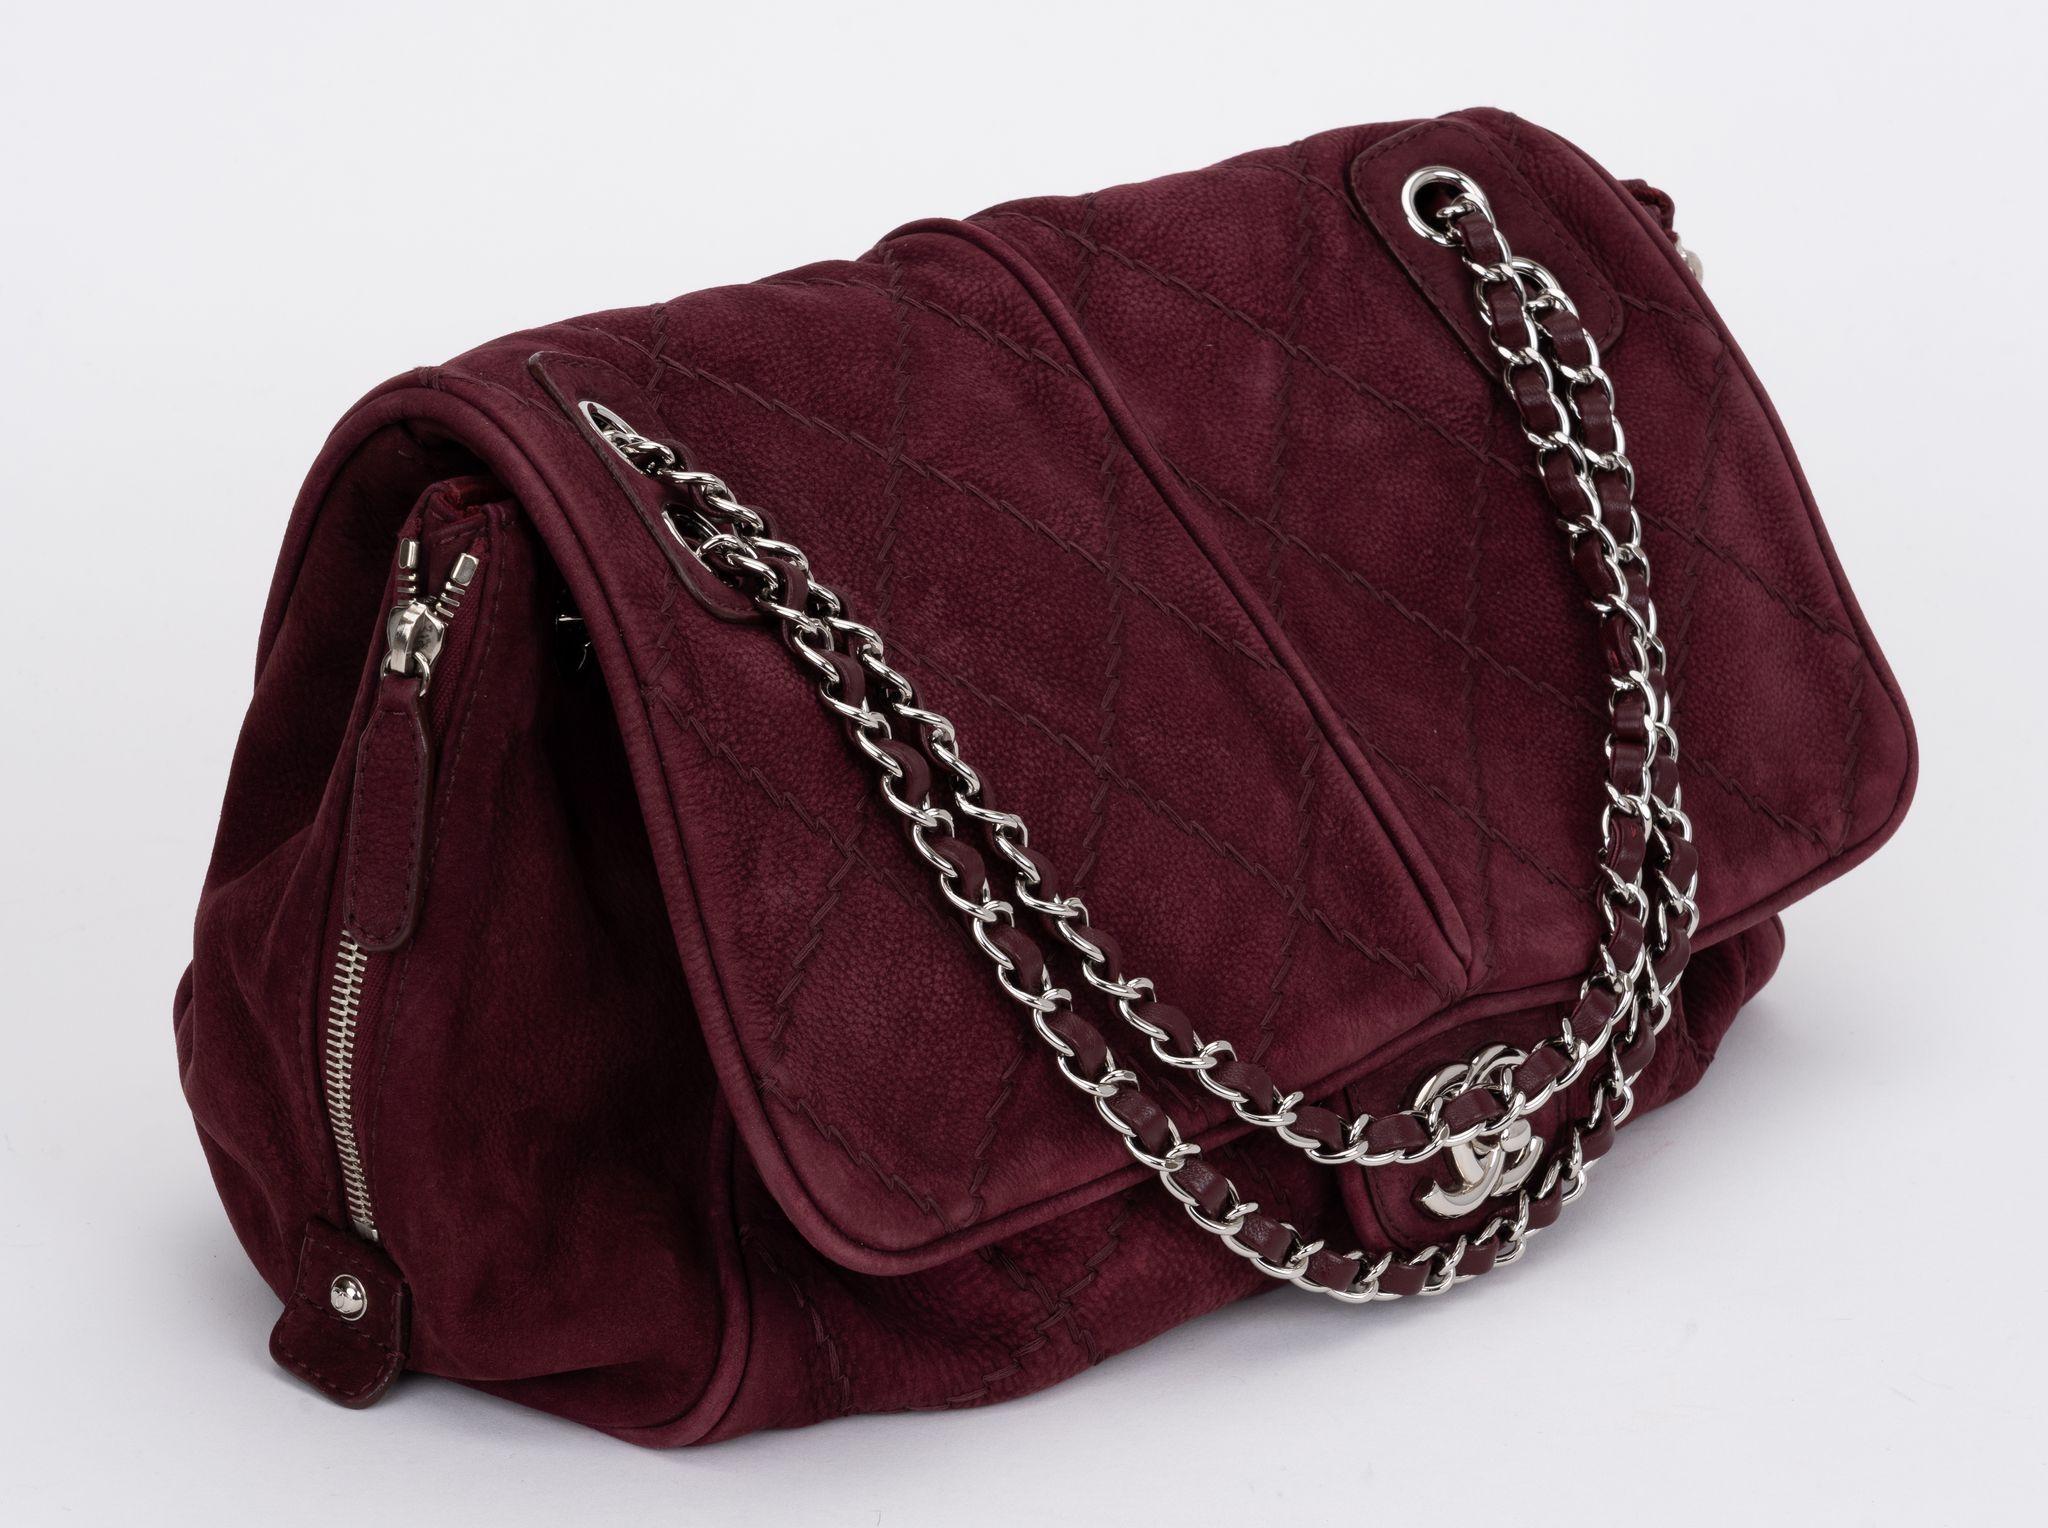 Chanel burgundy suede large single flap with accordion sides. Shoulder drop 7.5